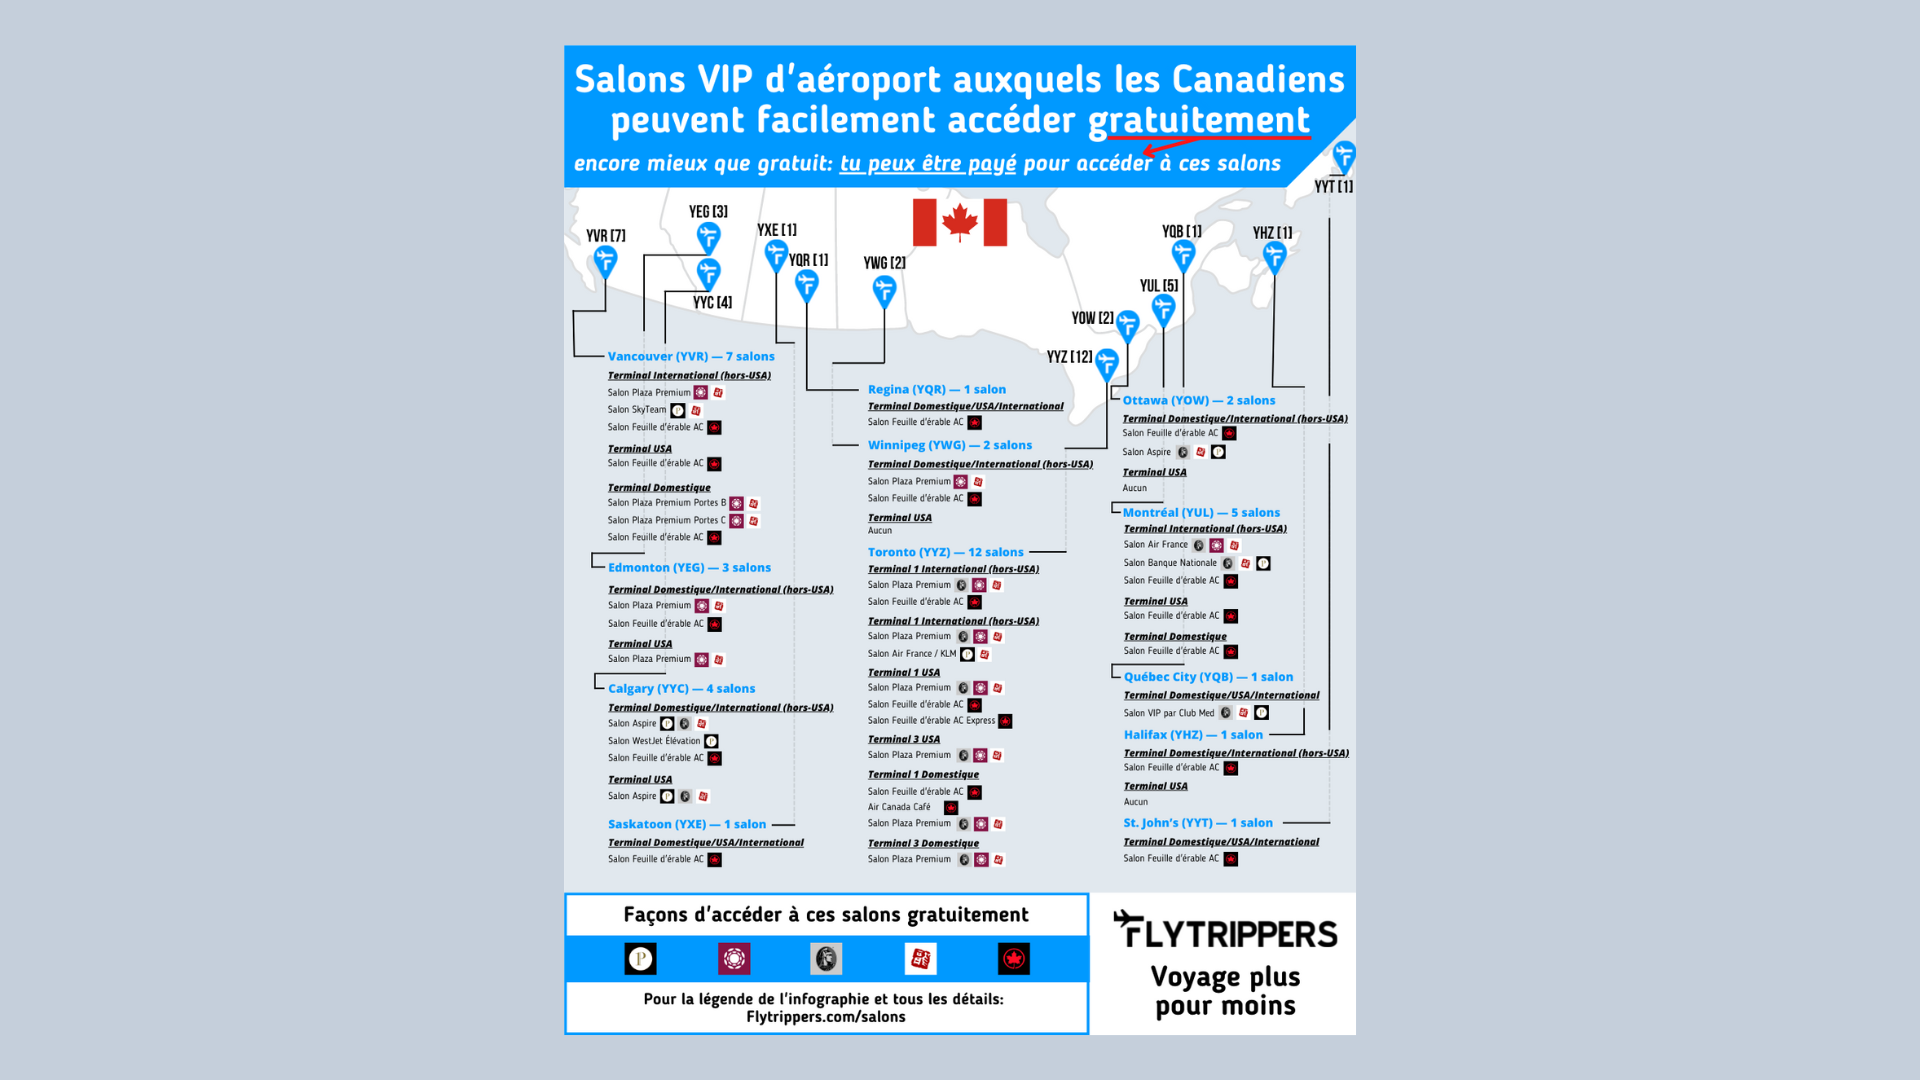 You are currently viewing Salons VIP d’aéroport au Canada: guide ultime